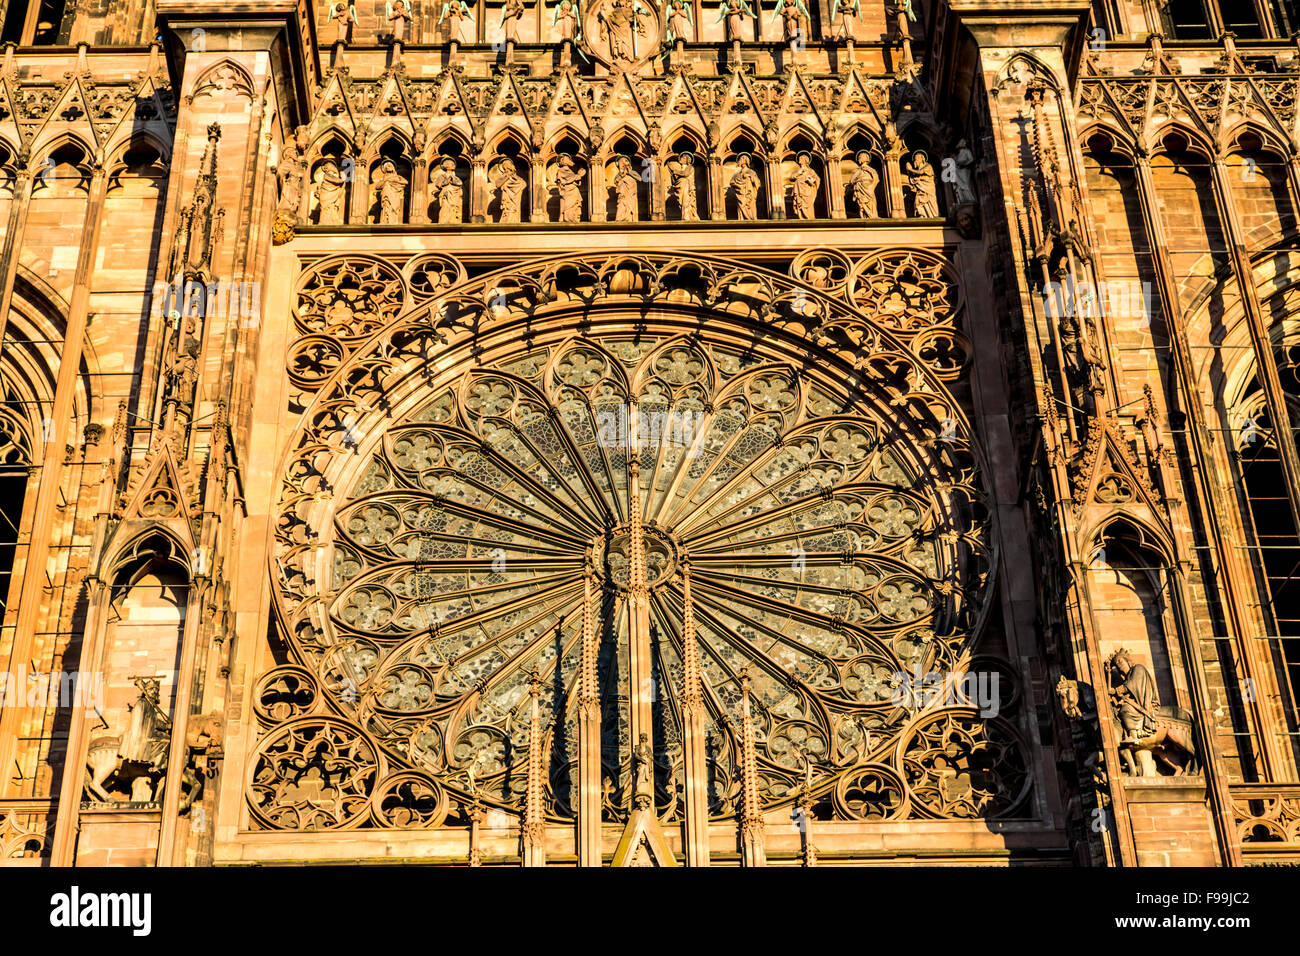 Cathedral of Our Lady, Gothic style church building in the old town area of Strasbourg, Alsace, France Stock Photo